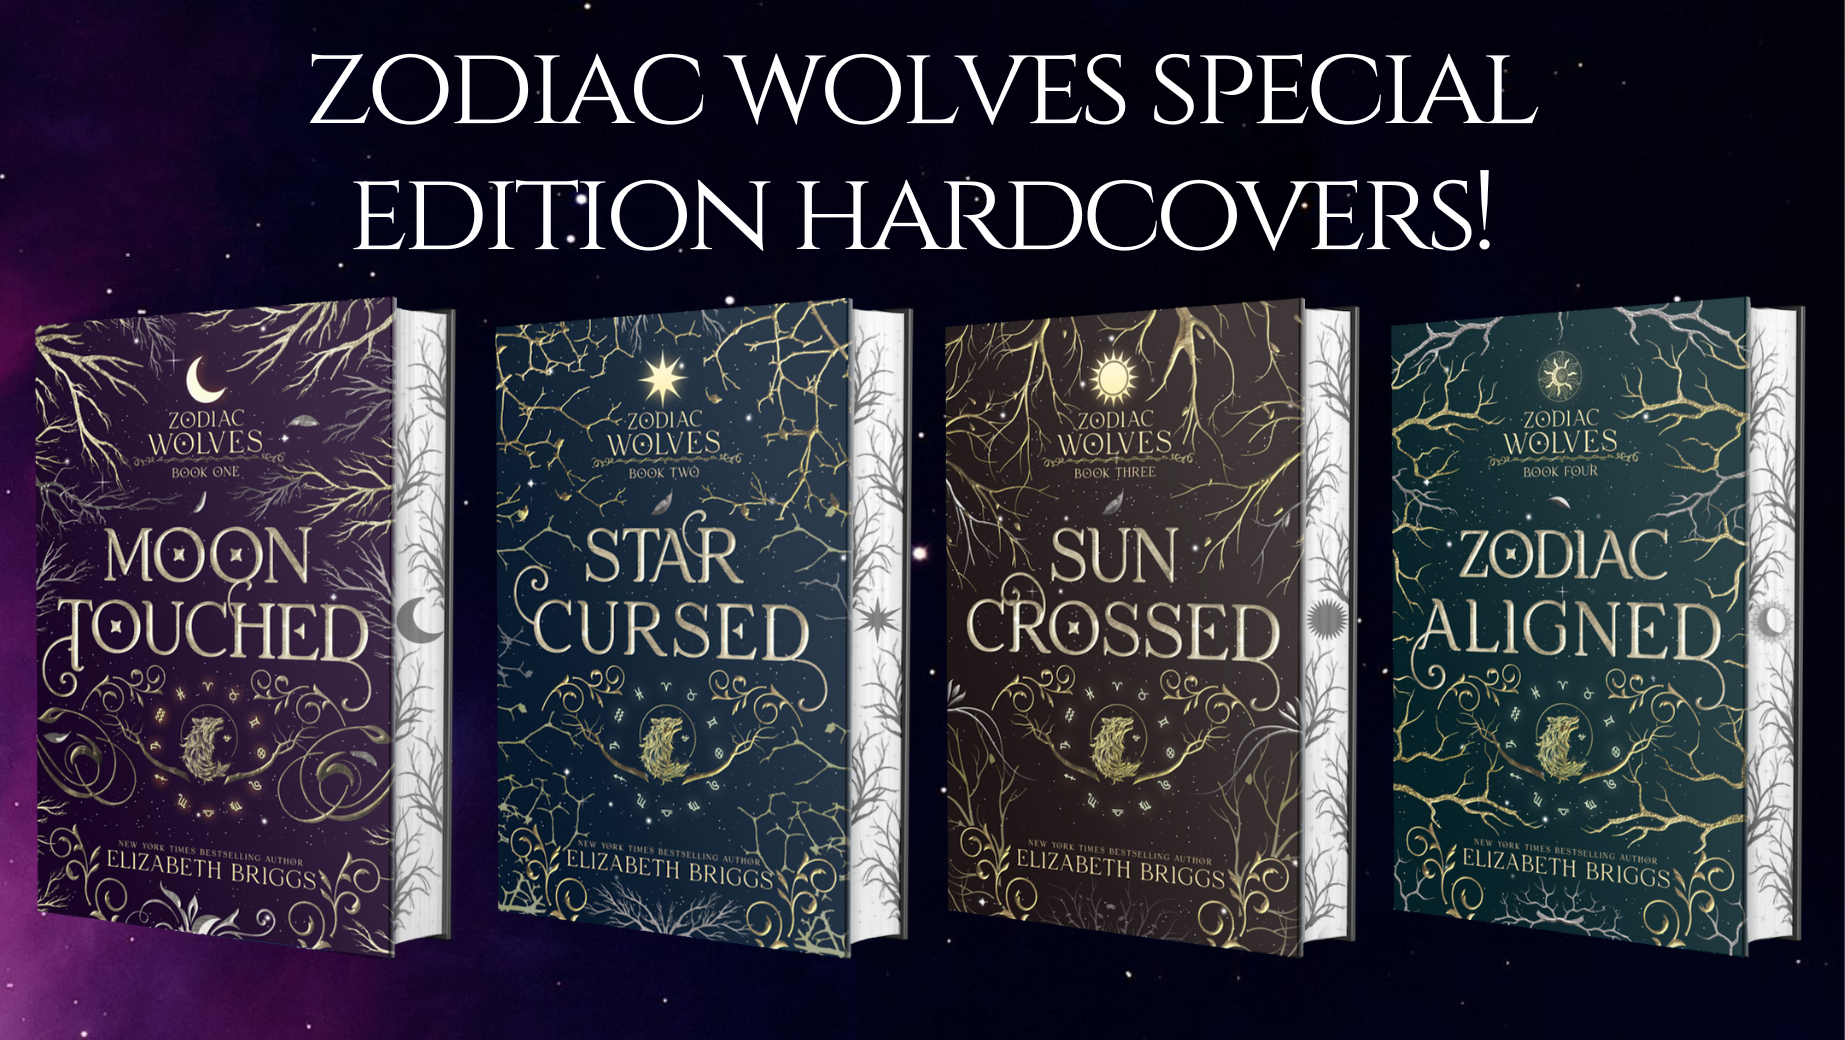 Zodiac Wolves Hardcovers